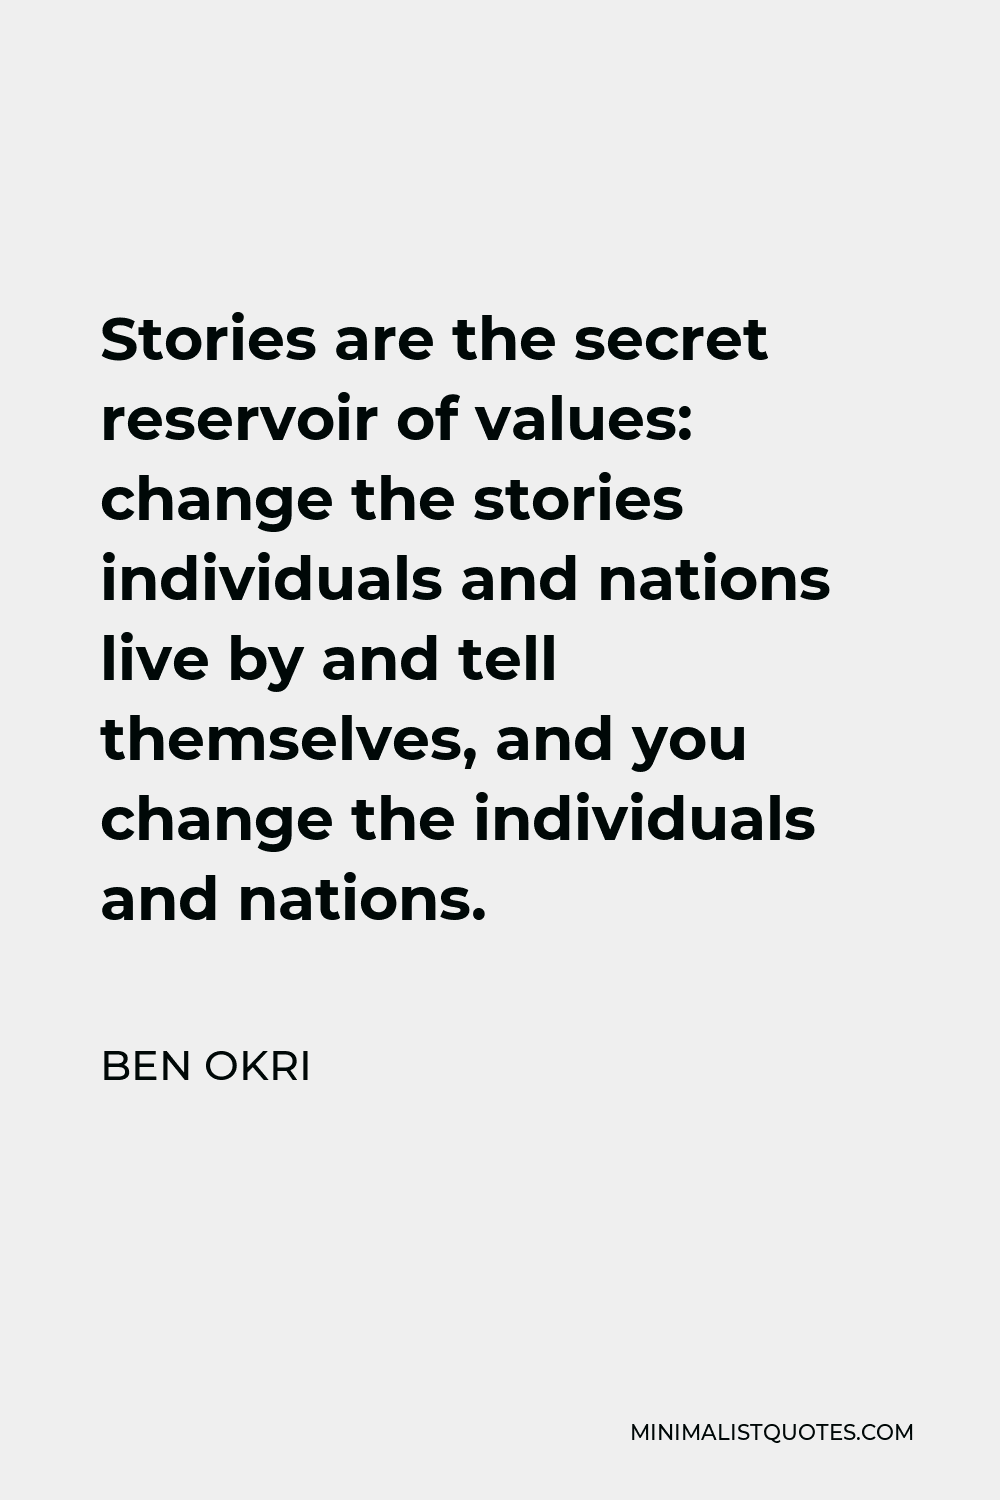 Ben Okri Quote - Stories are the secret reservoir of values: change the stories individuals and nations live by and tell themselves, and you change the individuals and nations.